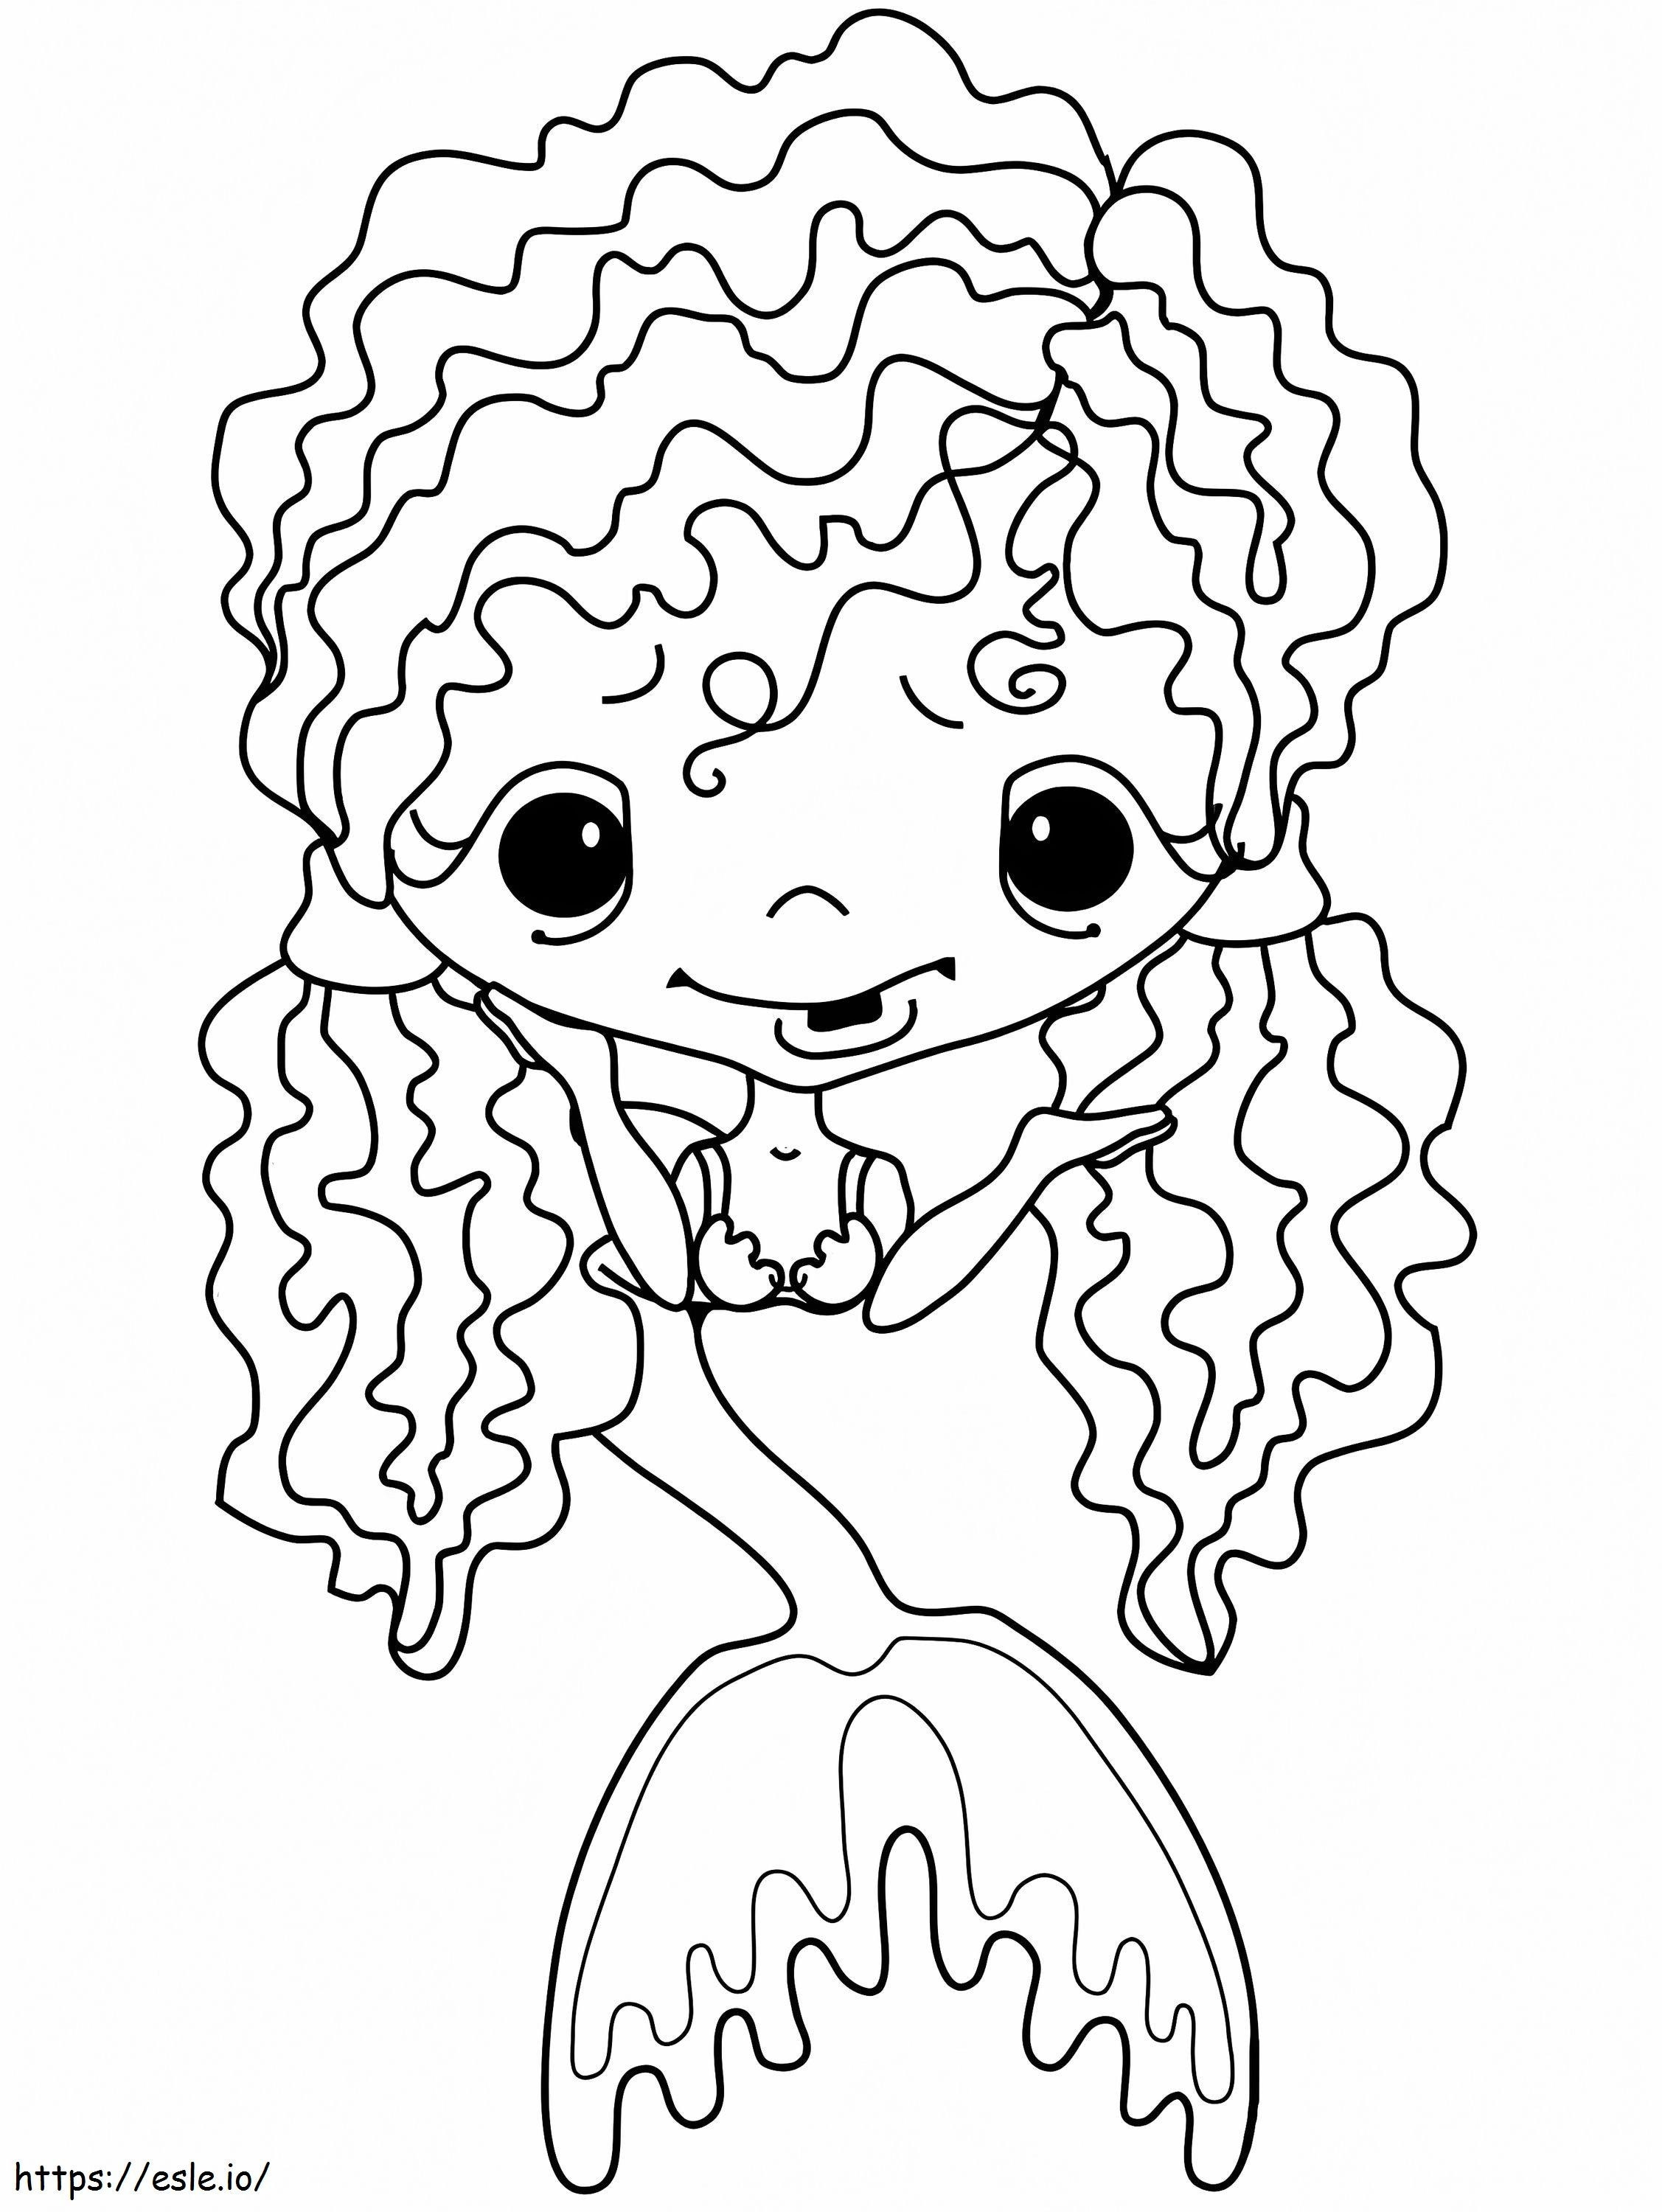 The Mermaid Smiles coloring page